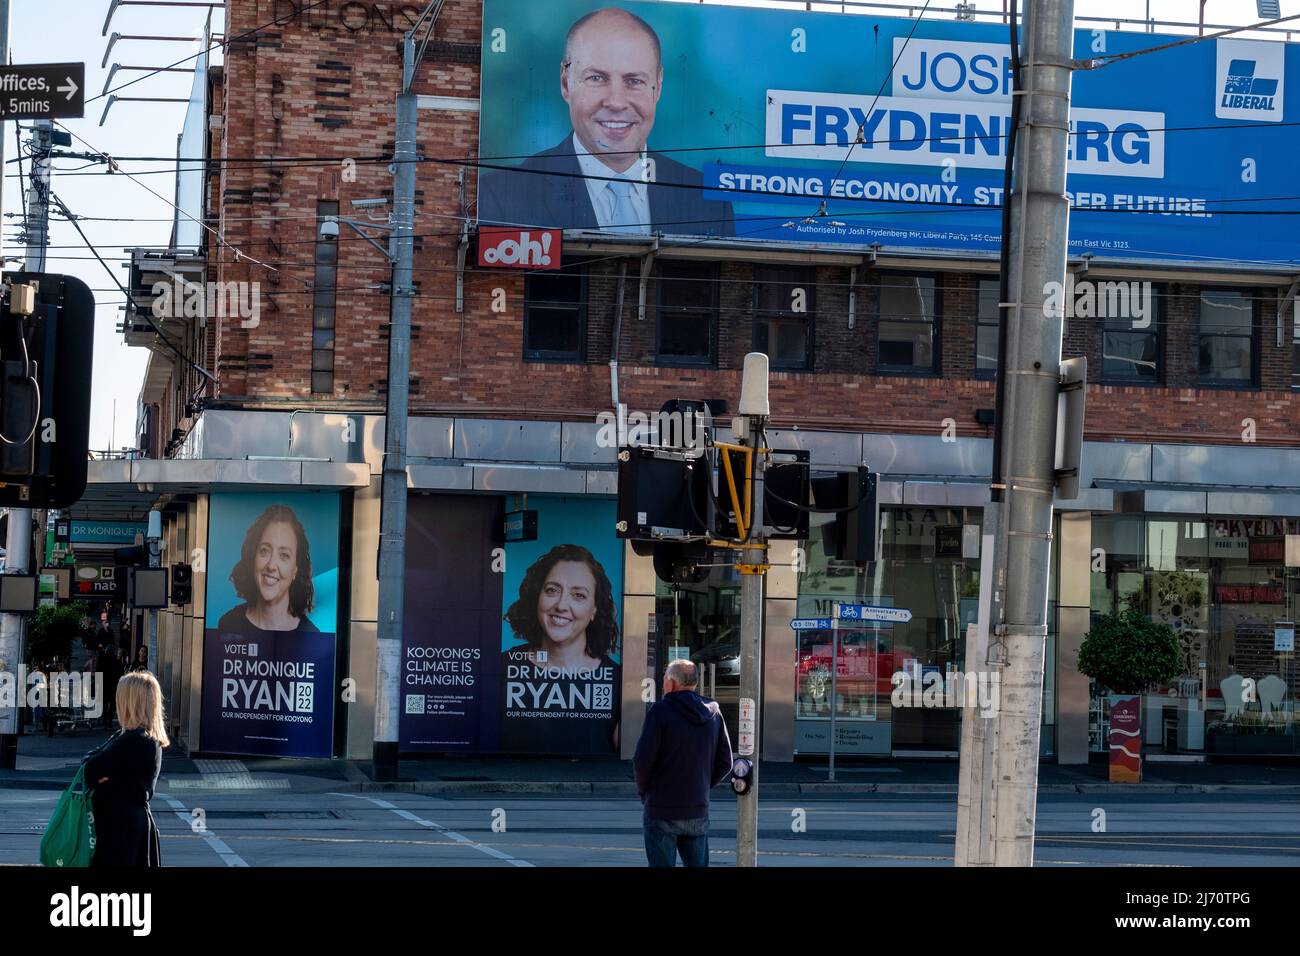 Political posters advertising Josh Frydenberg the Treasurer and his opponent Dr Monique Ryan an independent, who are contesting the seat of Kooyong in the 2022 Australian Federal elections. Stock Photo